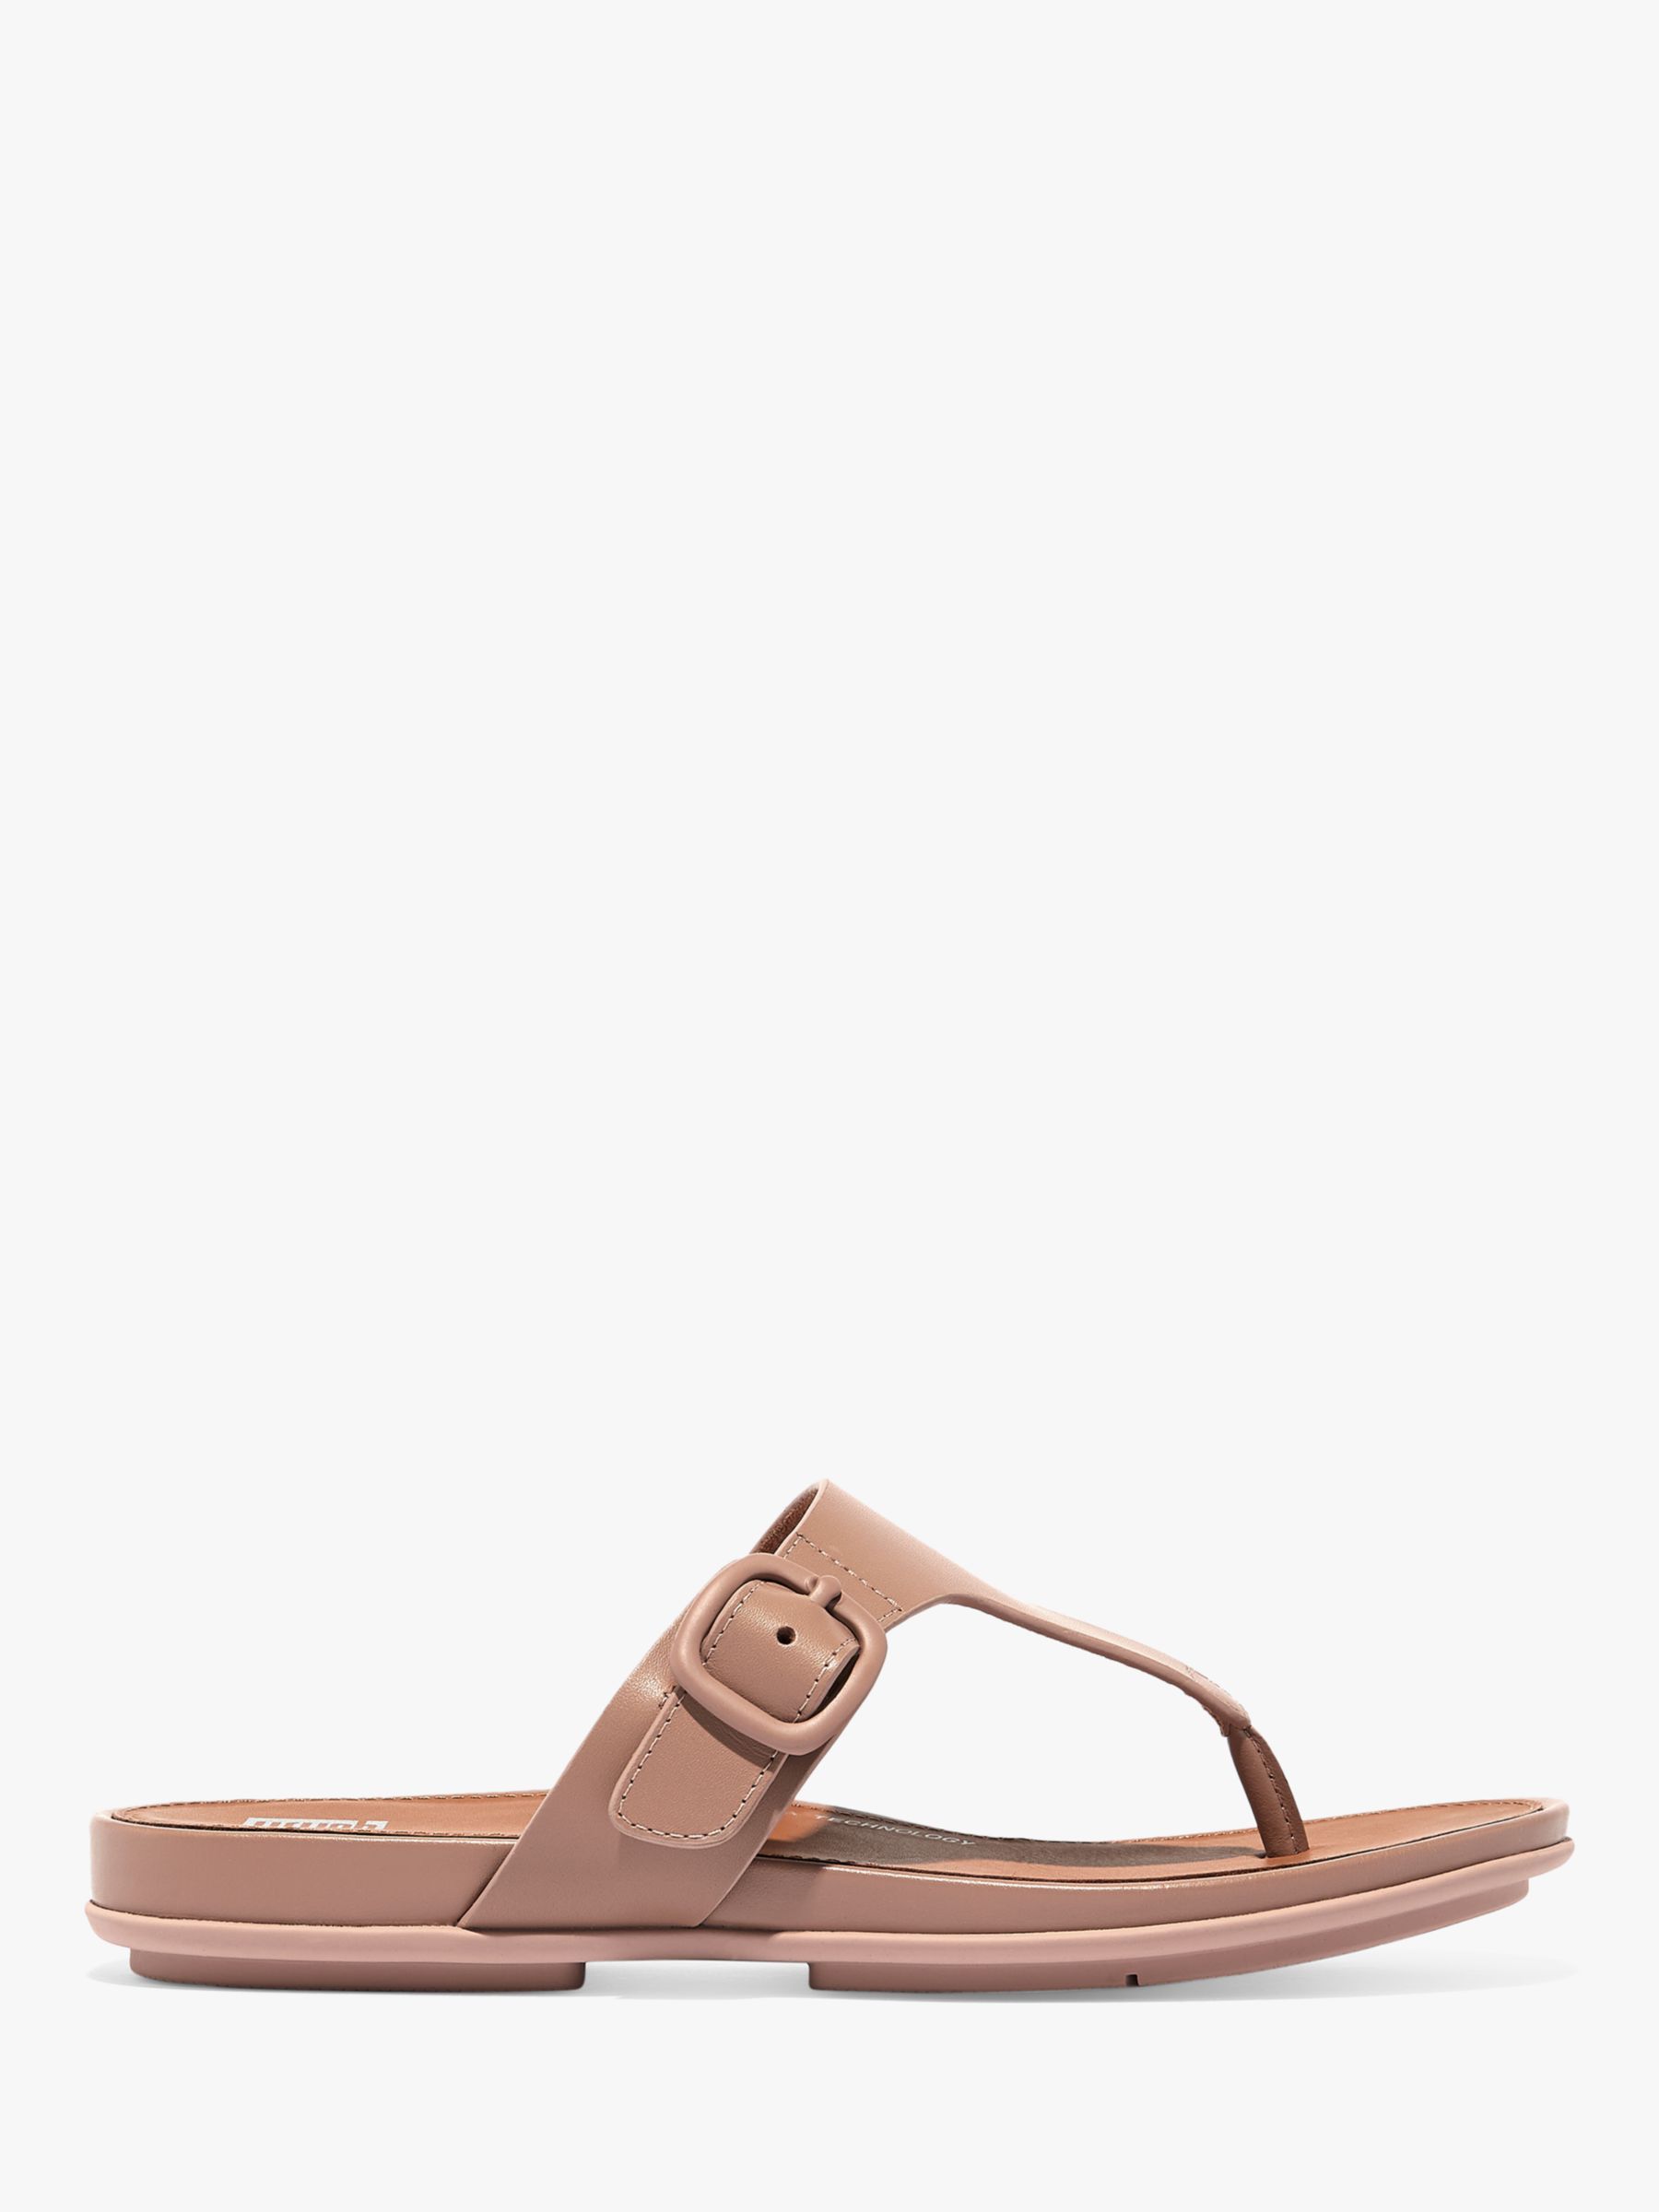 FitFlop Gracie Leather Toe Post Sandals, Beige at John Lewis & Partners